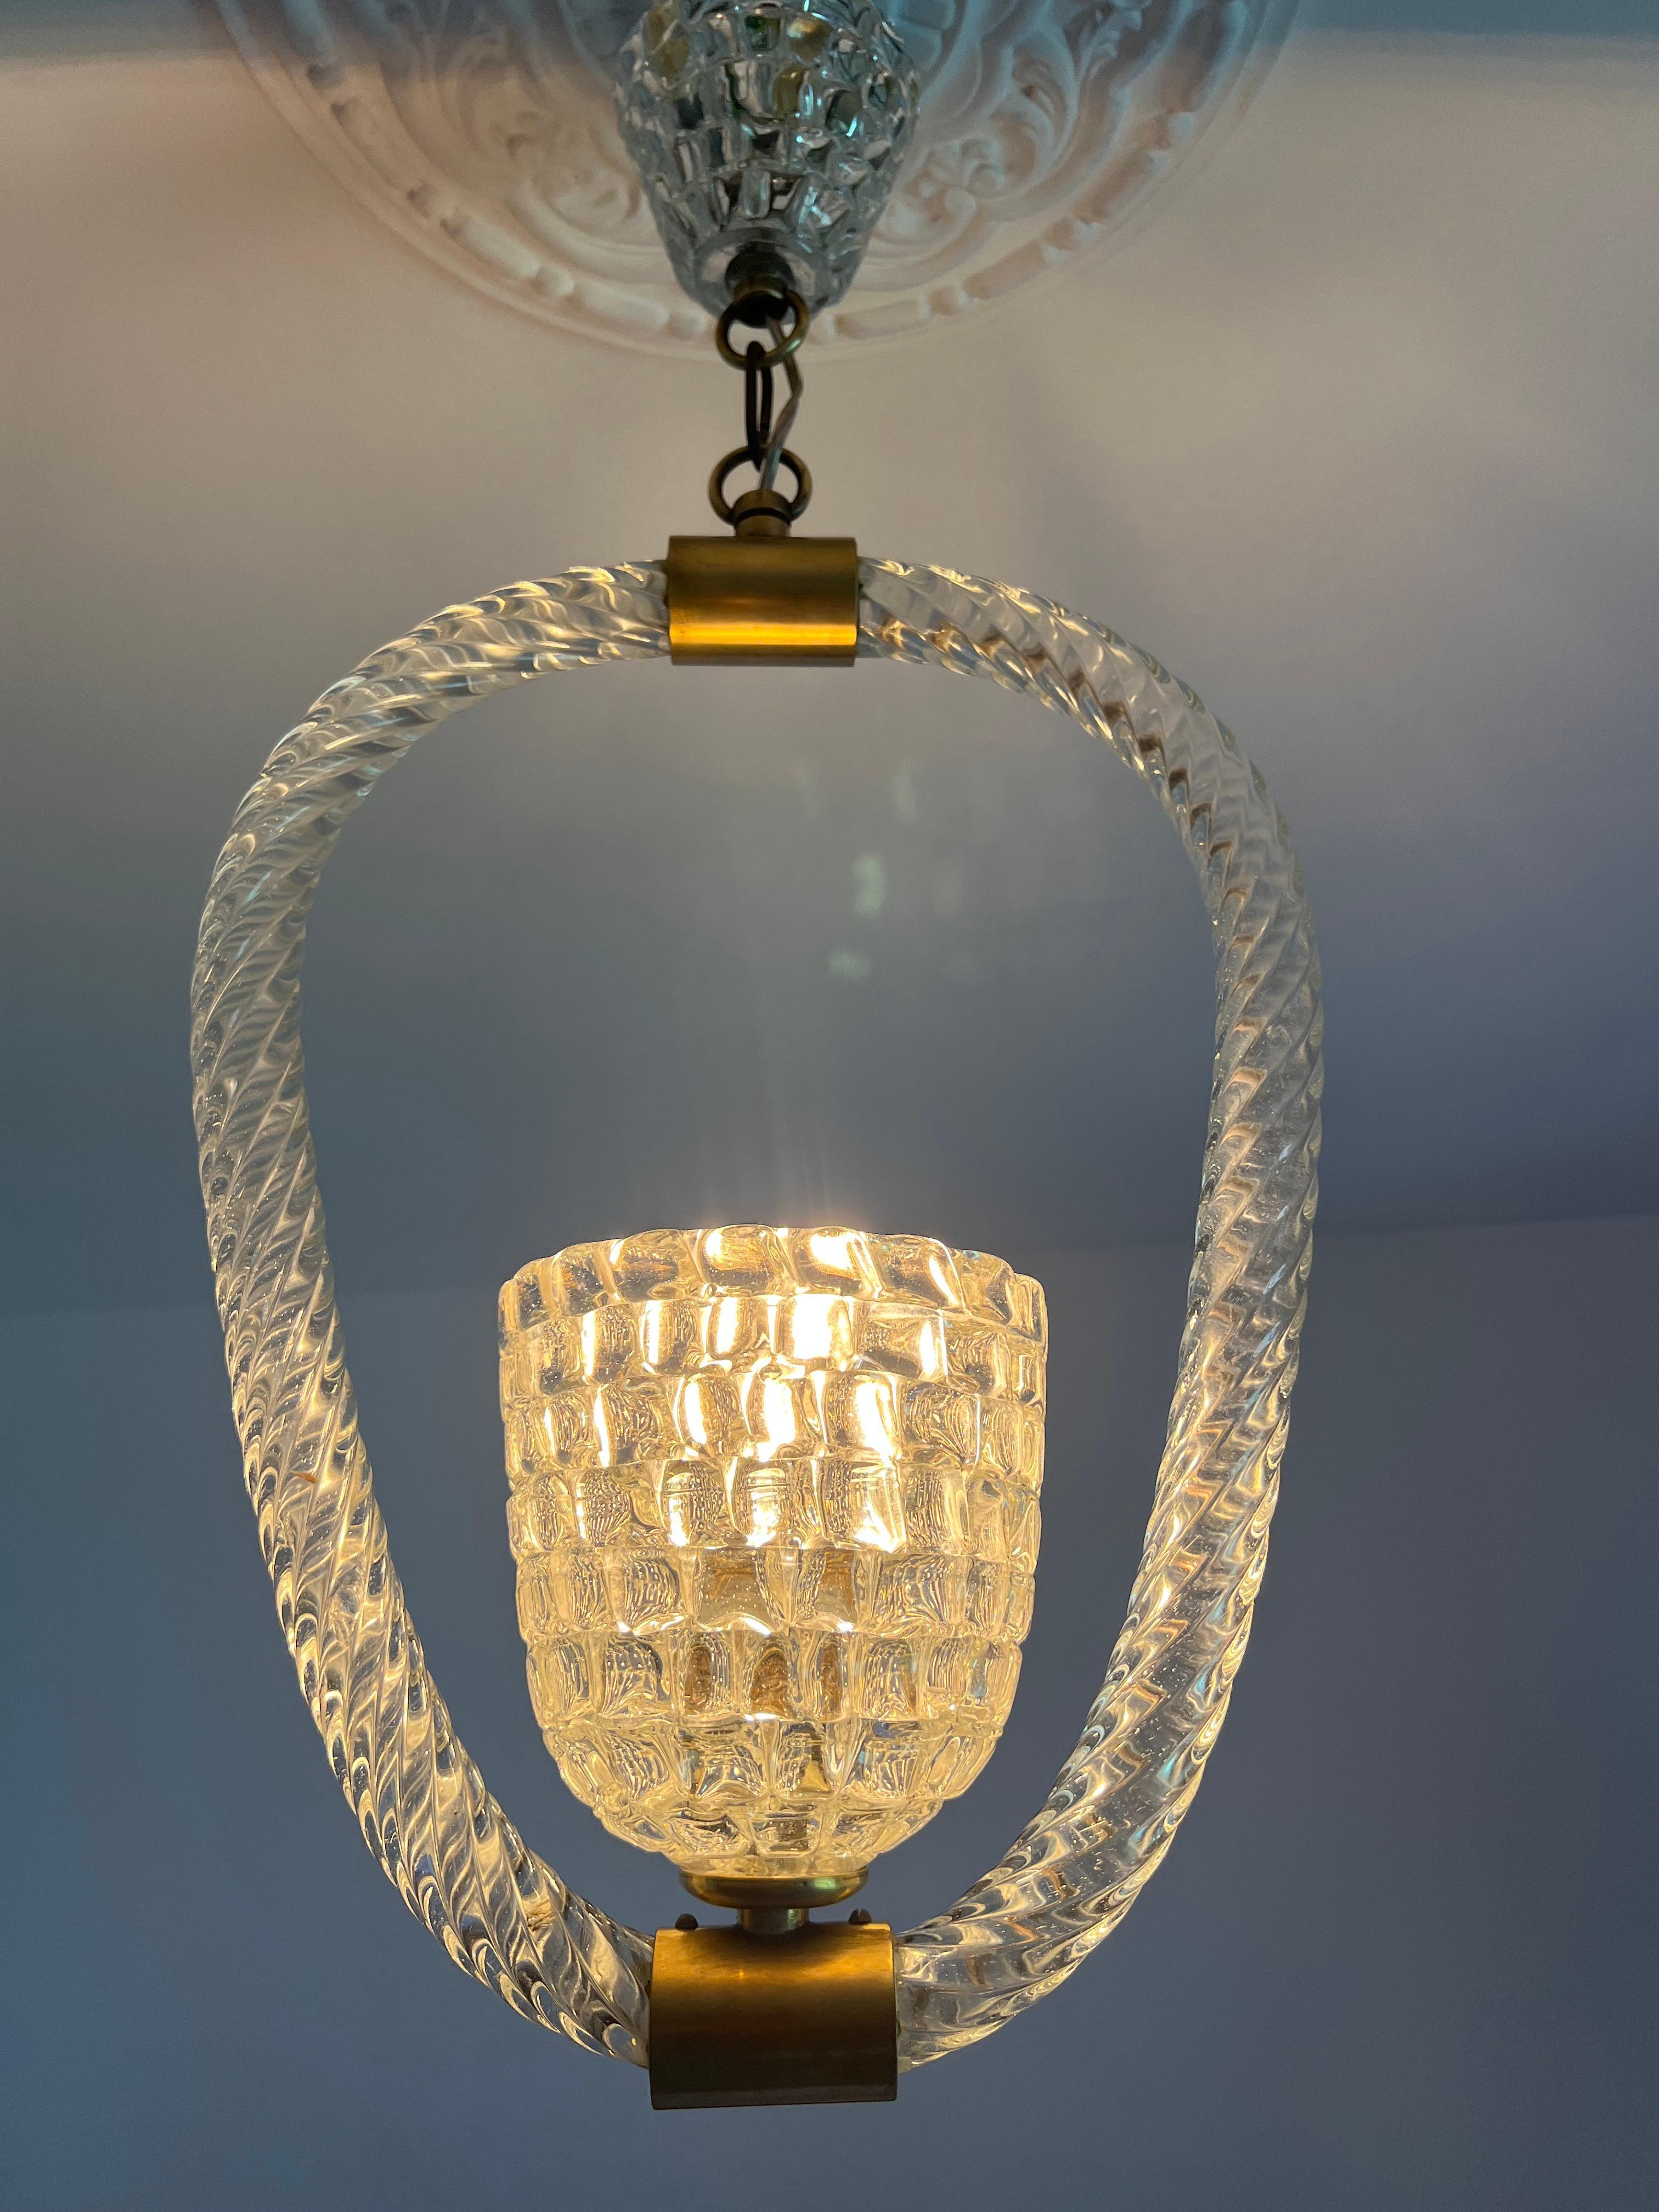 Wonderful and rare Art Deco chandelier by Ercole Barovier, 1940s. Piece of exquisite quality.
From Private collection by Giancarlo Planta.